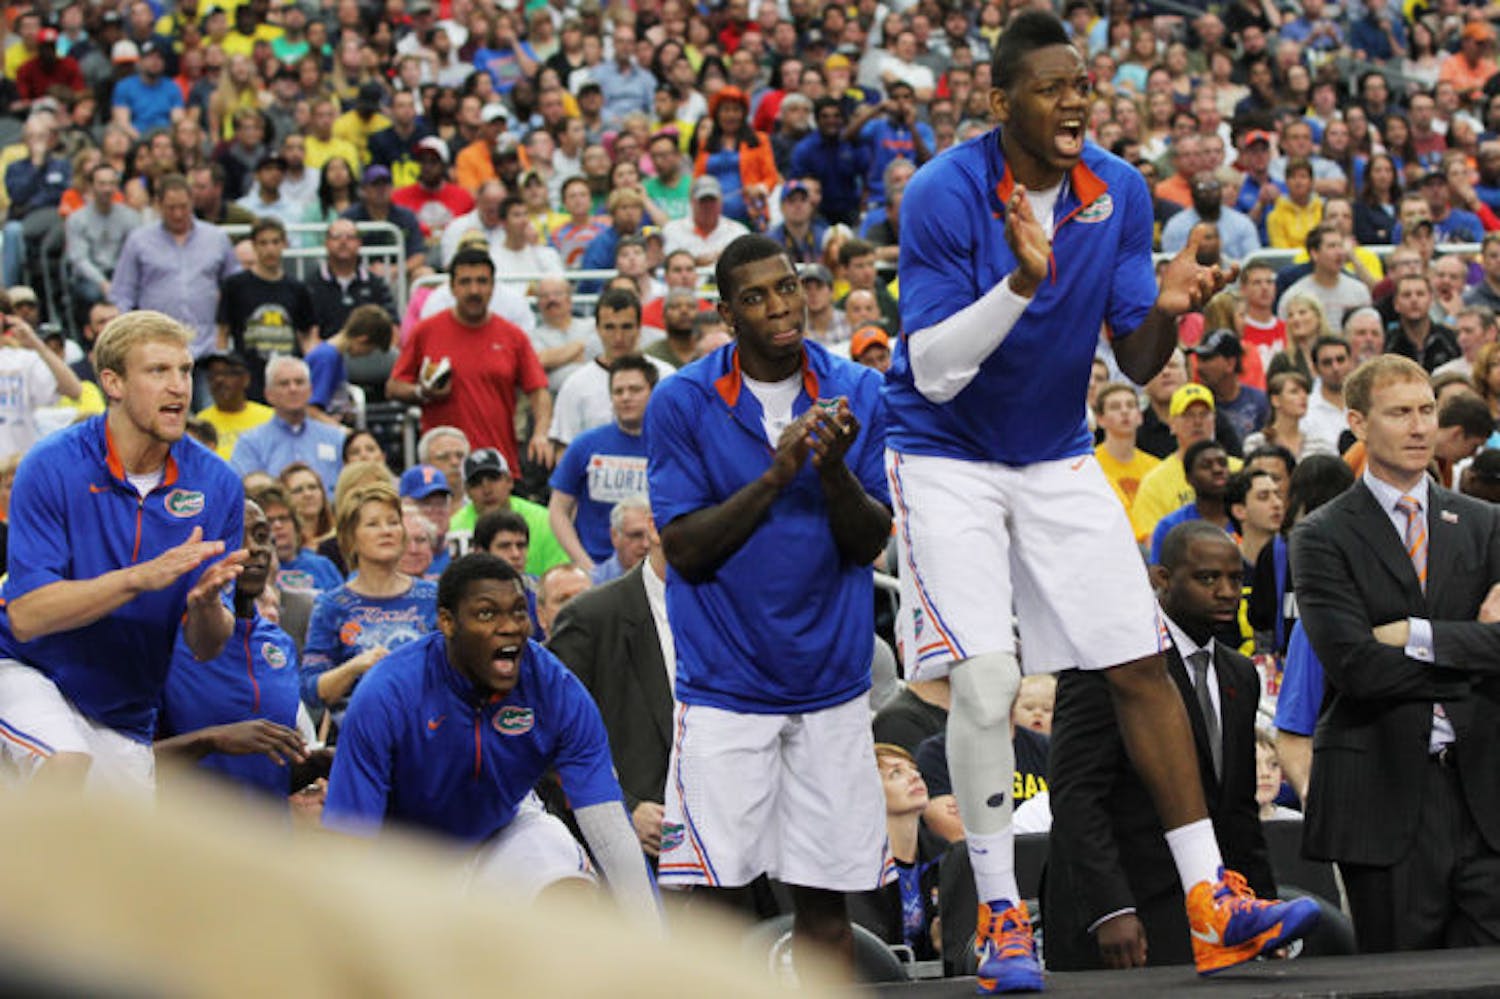 Will Yeguete (15) cheers for his teammates during Florida’s 79-59 loss to Michigan on March 31 in Arlington, Texas.